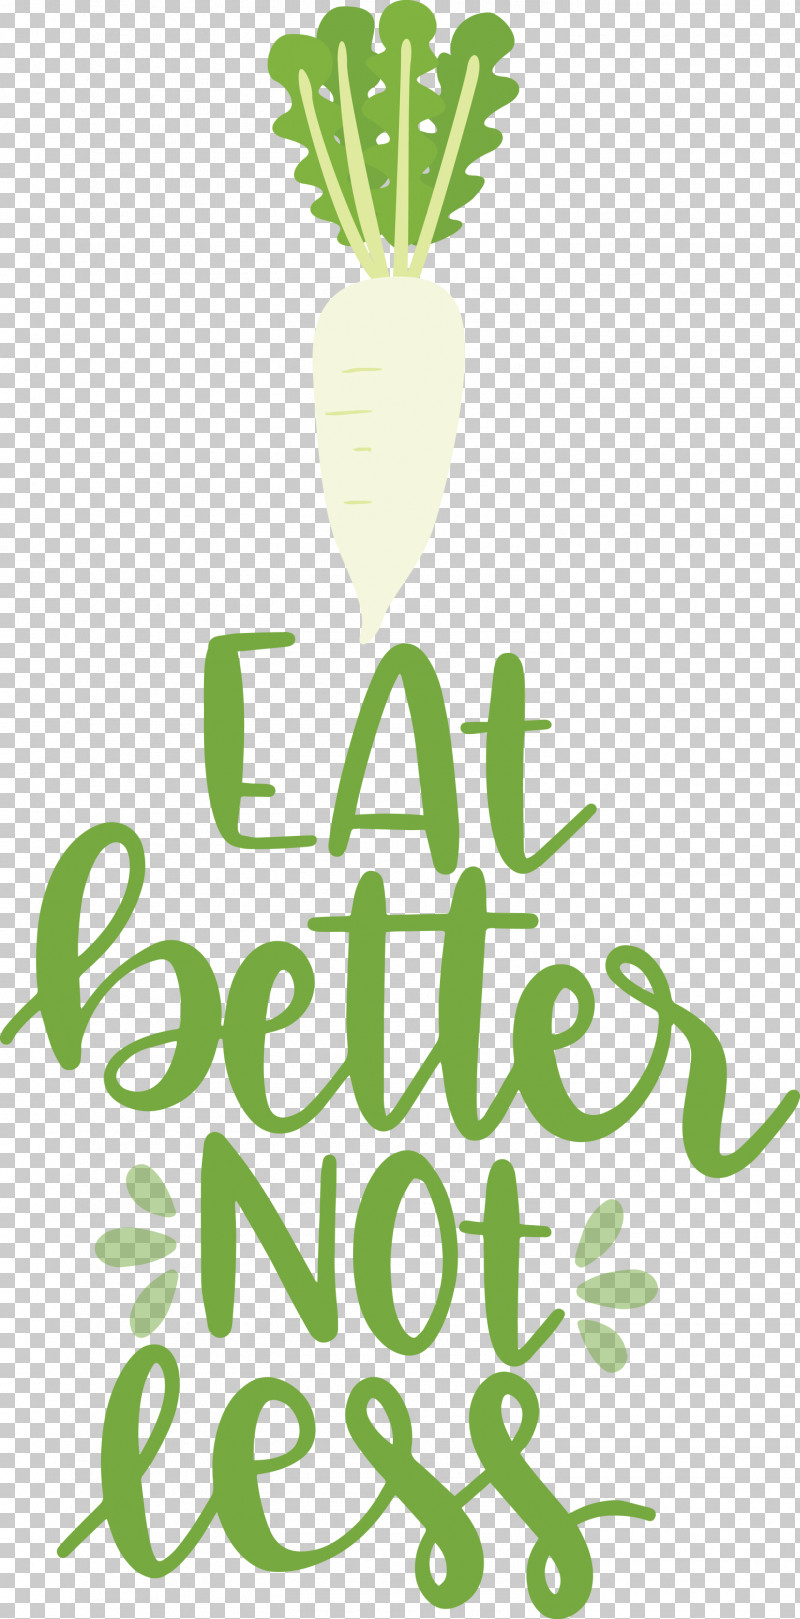 Eat Better Not Less Food Kitchen PNG, Clipart, Flower, Food, Green, Kitchen, Leaf Free PNG Download